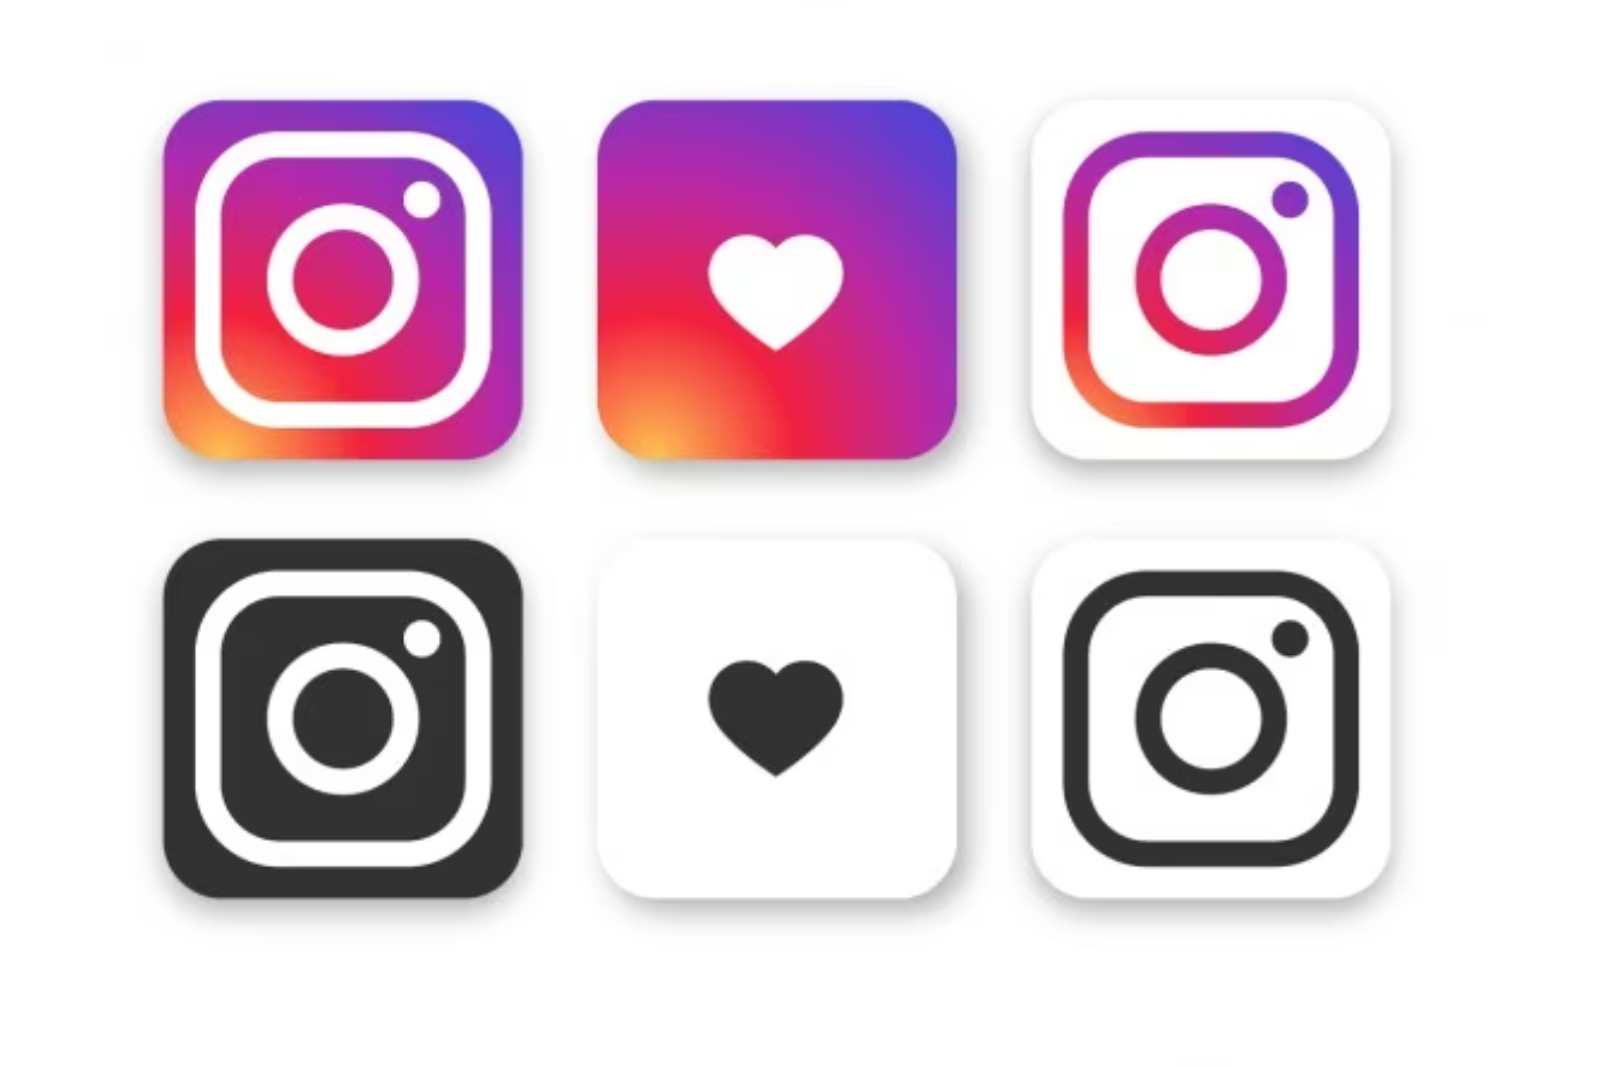 10 Expert Predicts the Future of Instagram in 2030